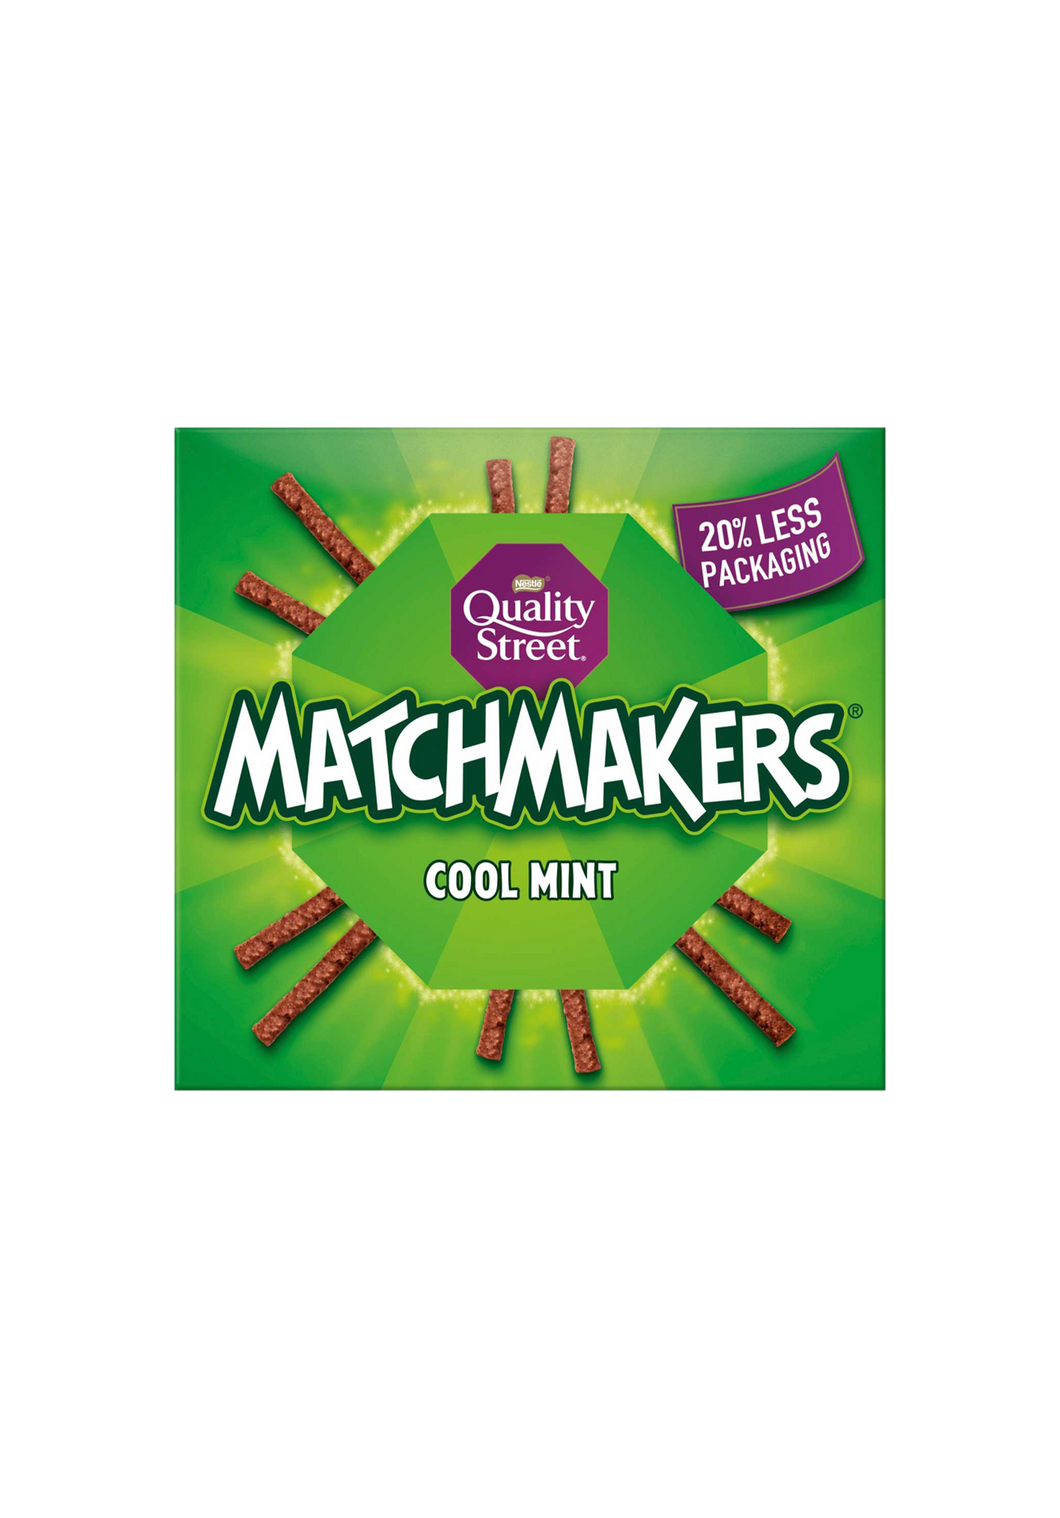 Nestle Quality Street Matchmakers Cool Mint 120g